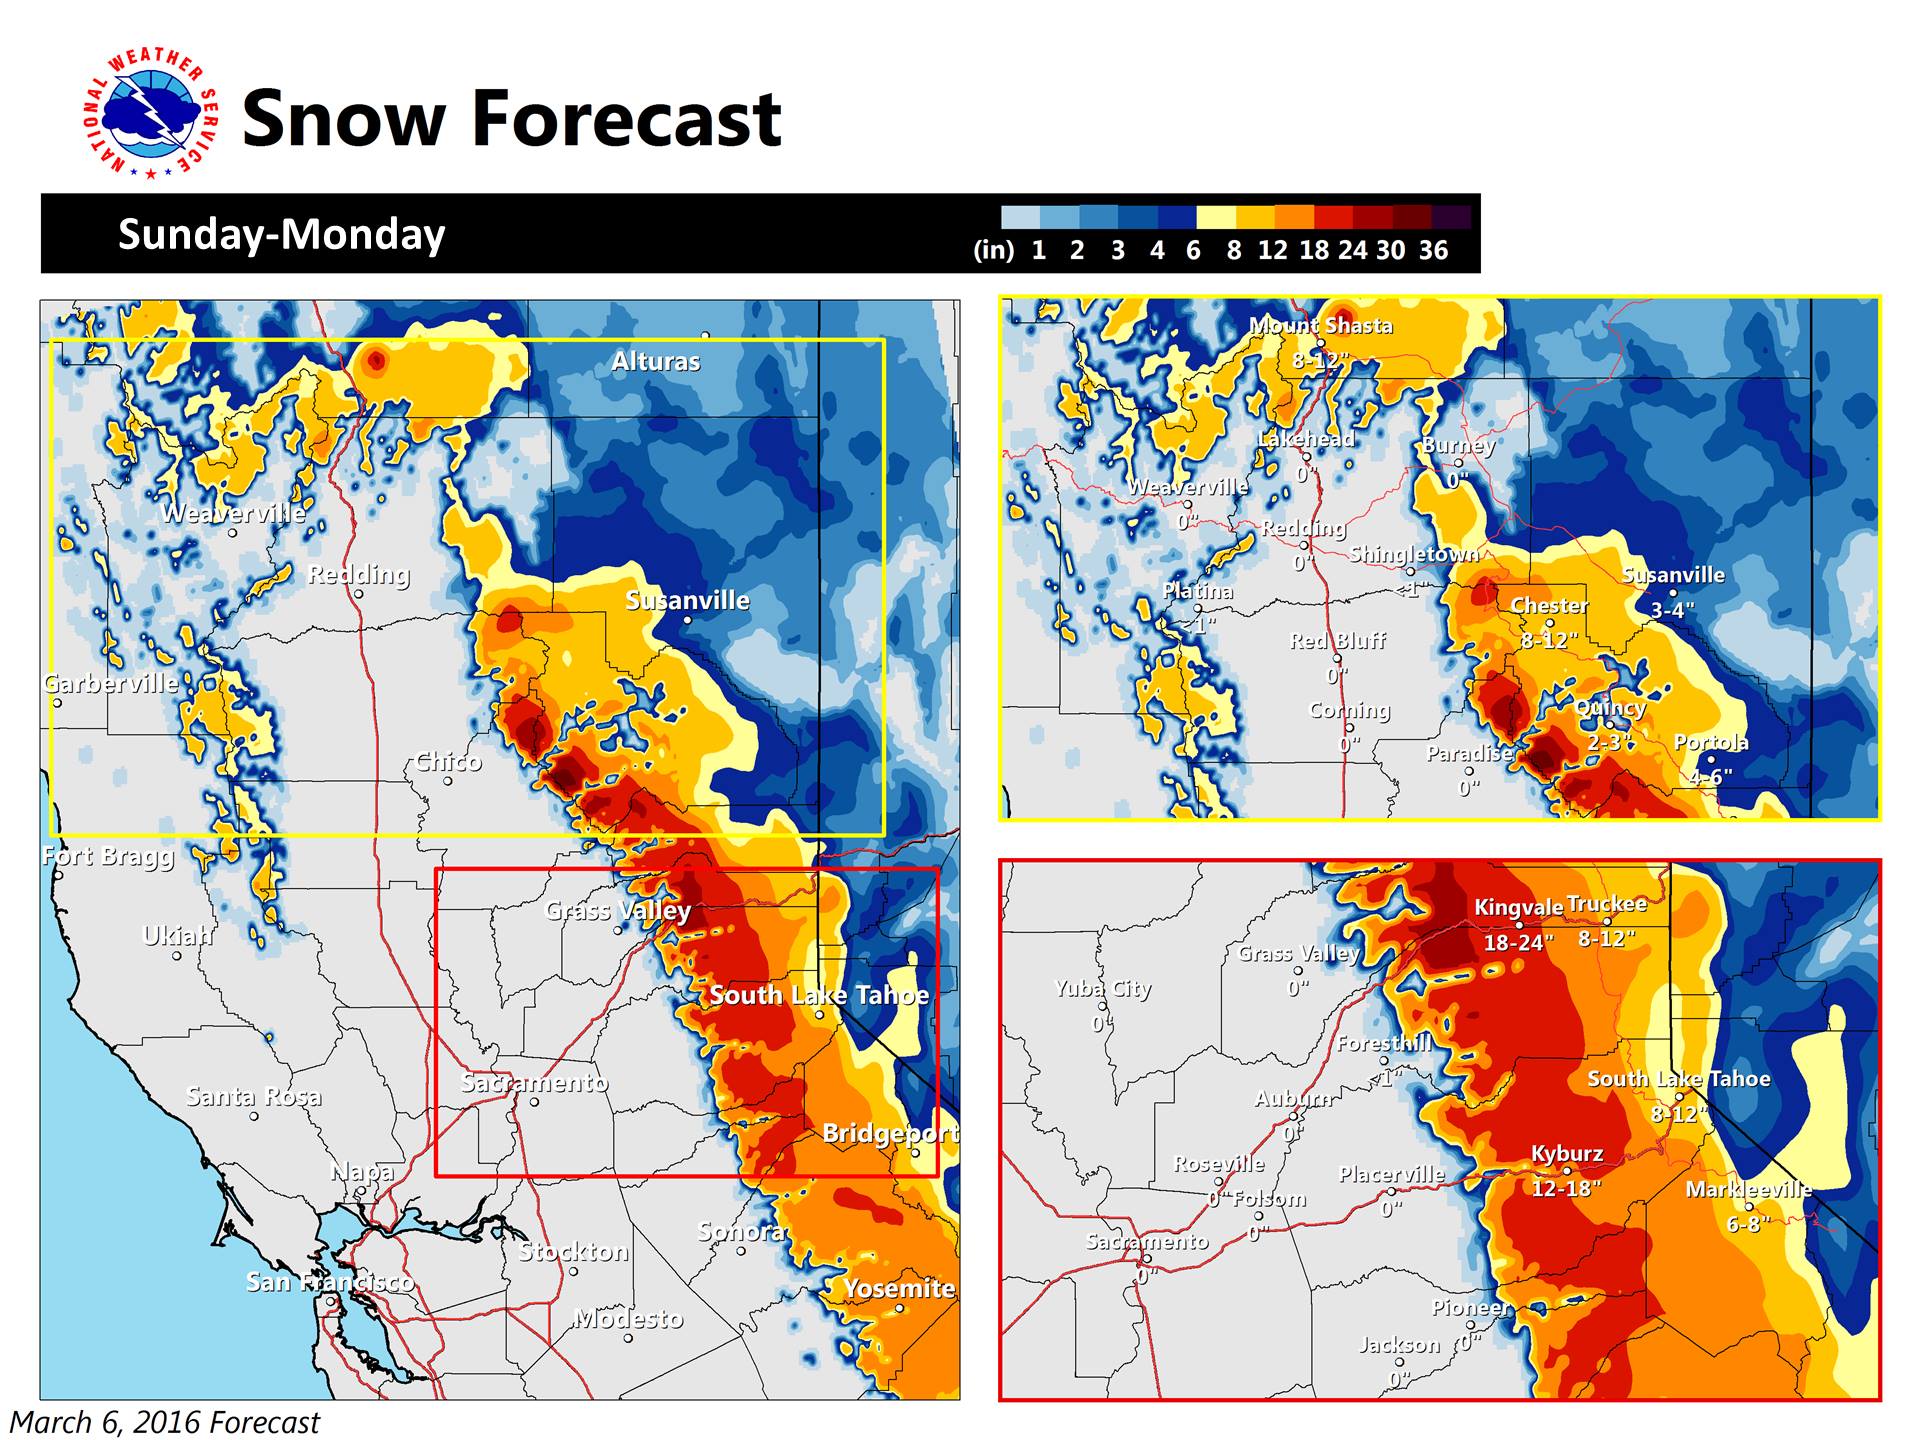 "Our next system will move in this evening bringing very heavy snow above 4000 ft! Expect chain controls and avoid travel over the mountains if possible." - NOAA Sacramento, CA today